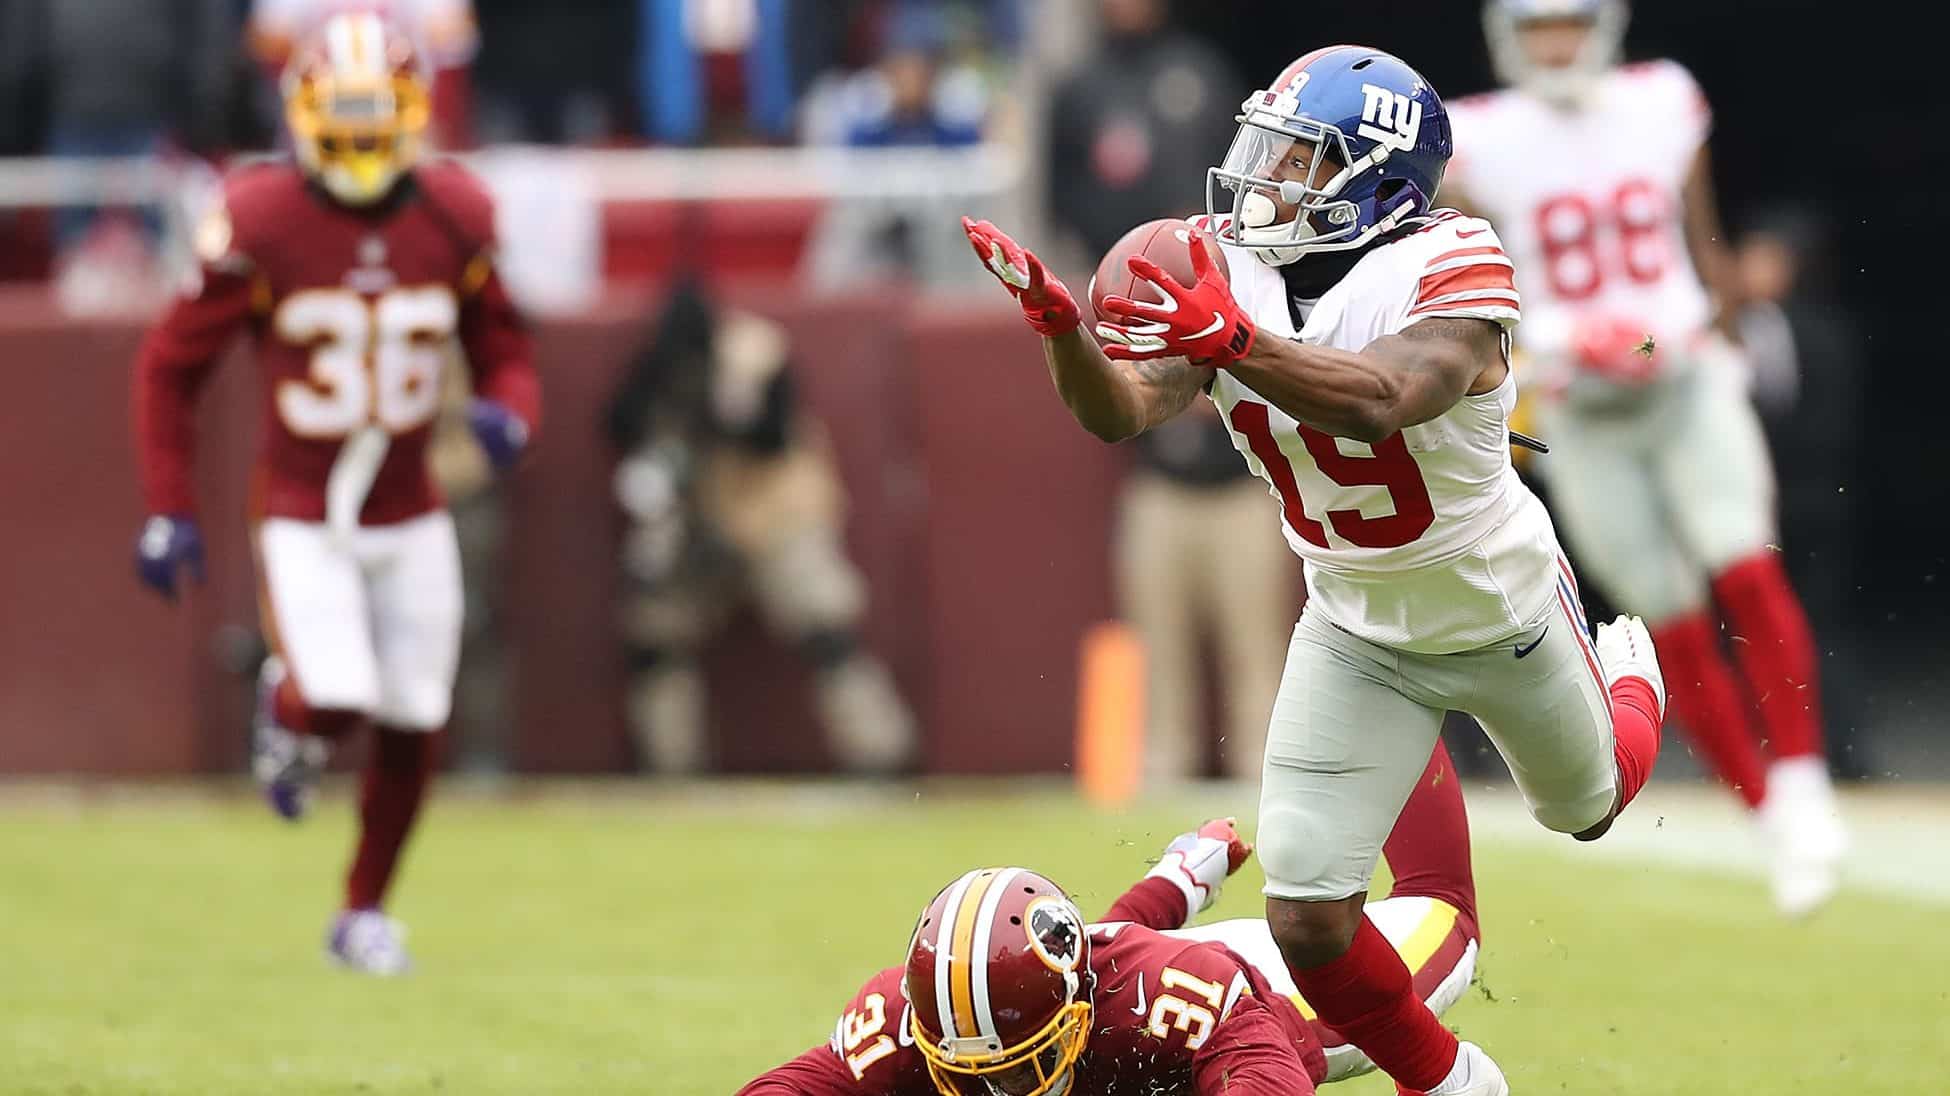 LANDOVER, MD - DECEMBER 09: Wide receiver Corey Coleman #19 of the New York Giants attempts to pull in a catch in the first quarter against the Washington Redskins at FedExField on December 9, 2018 in Landover, Maryland.